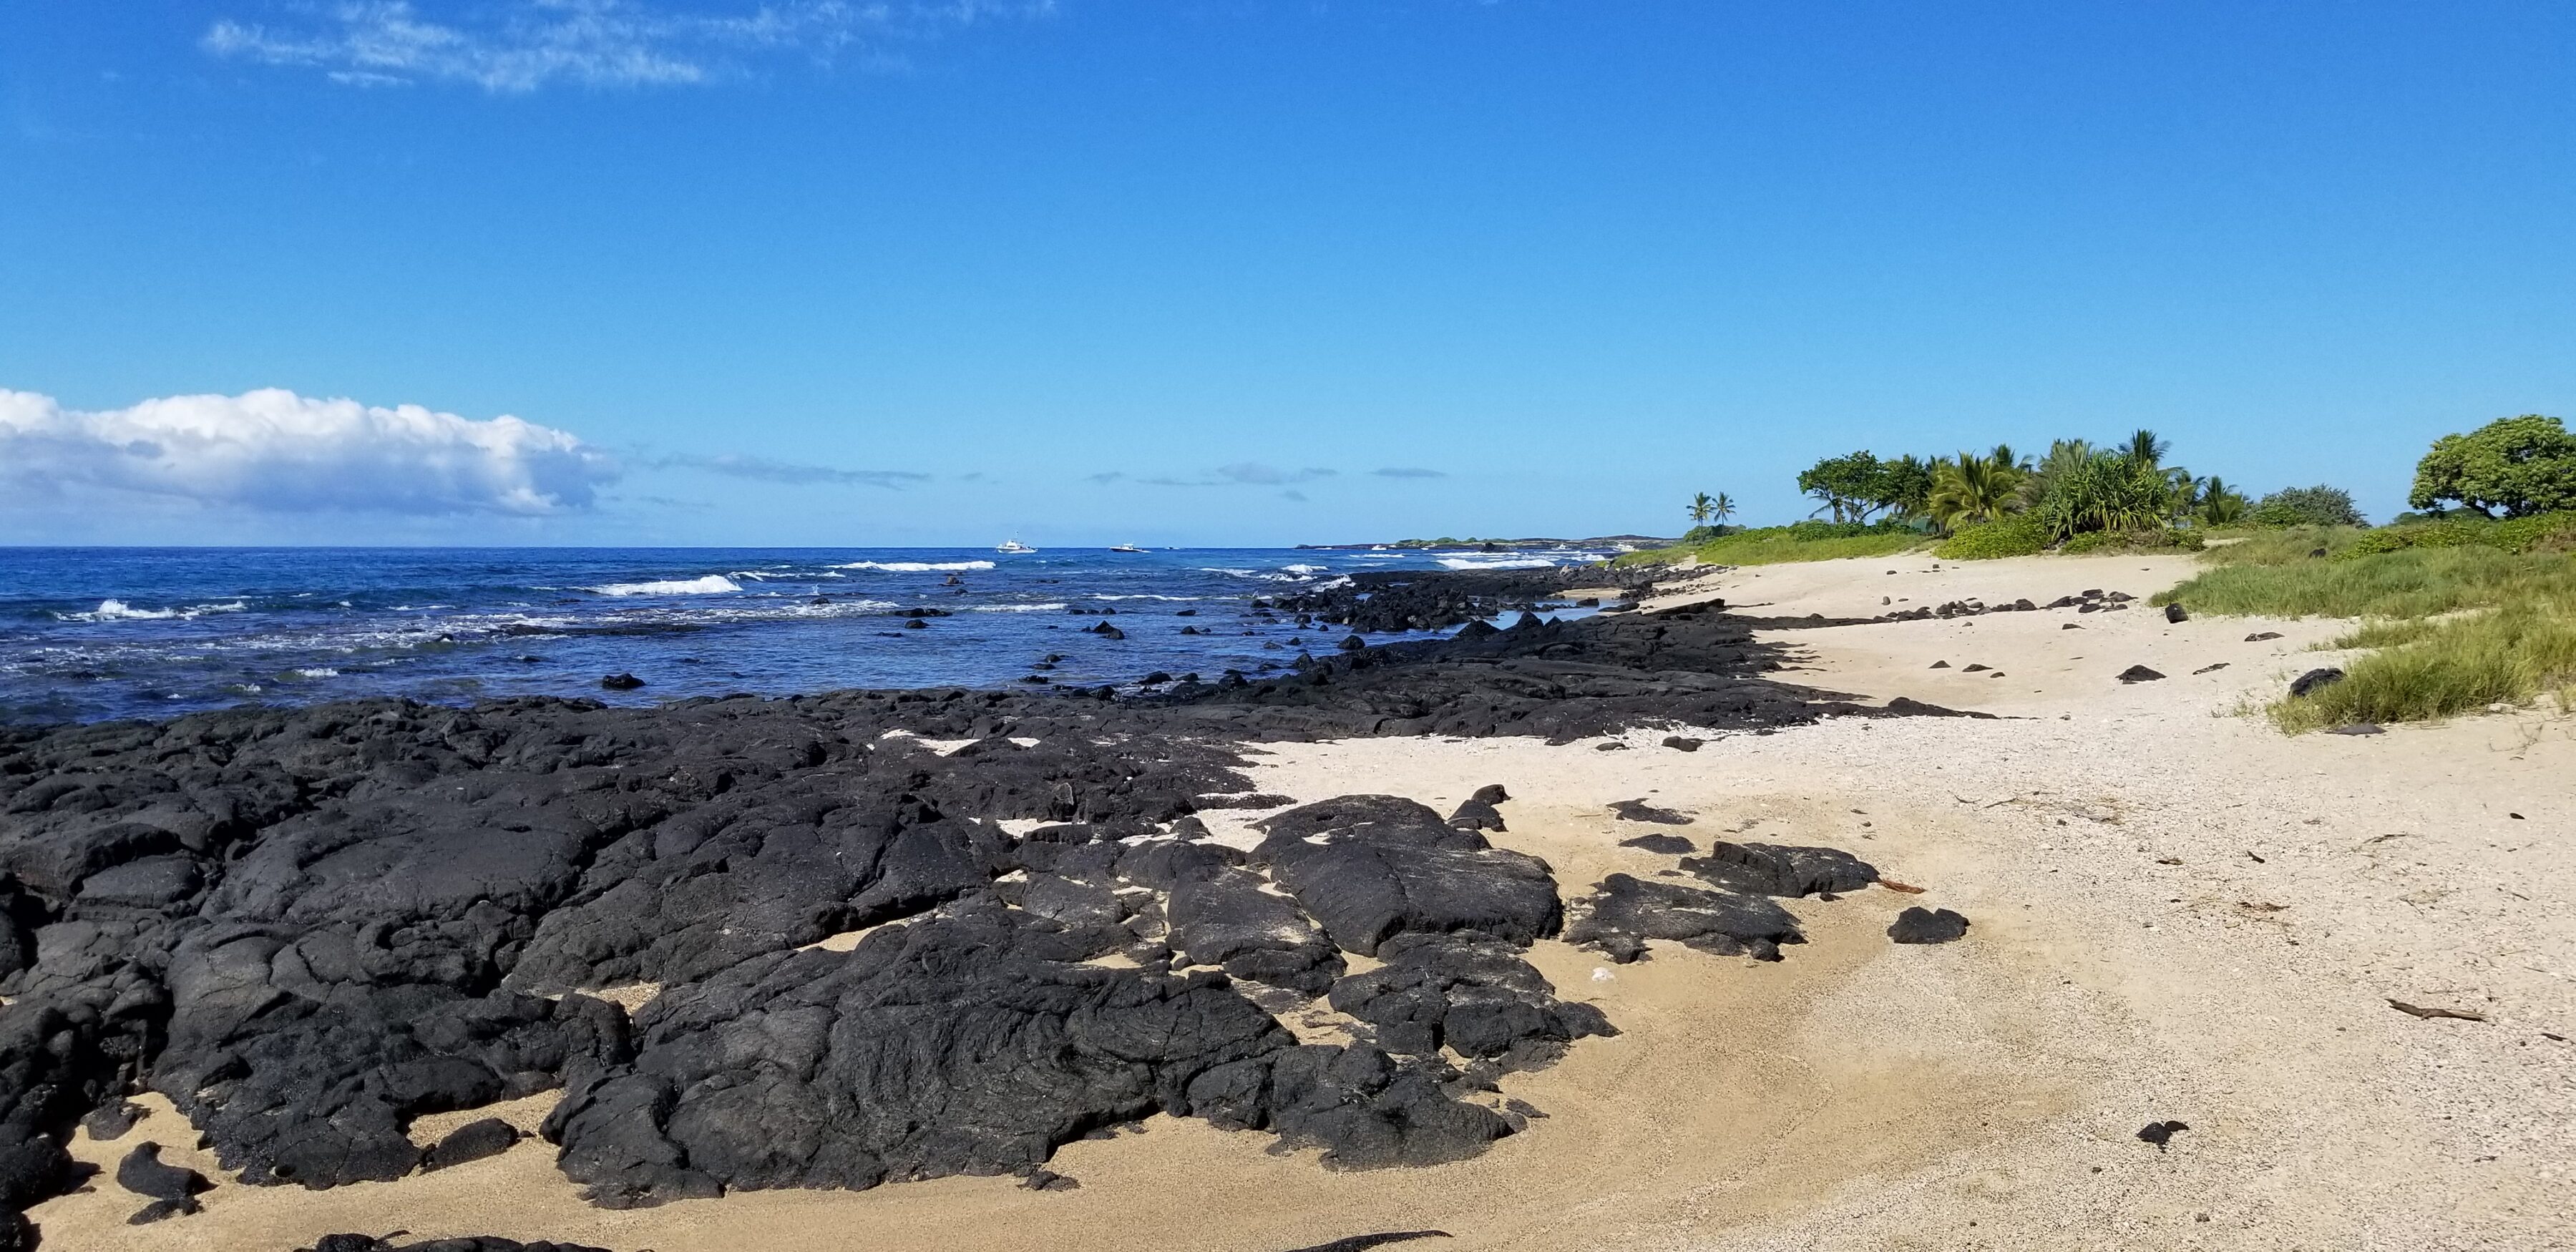 A perfect beach day on the Big Island of Hawaii | Julie Edens Coldwell Banker Island Properties